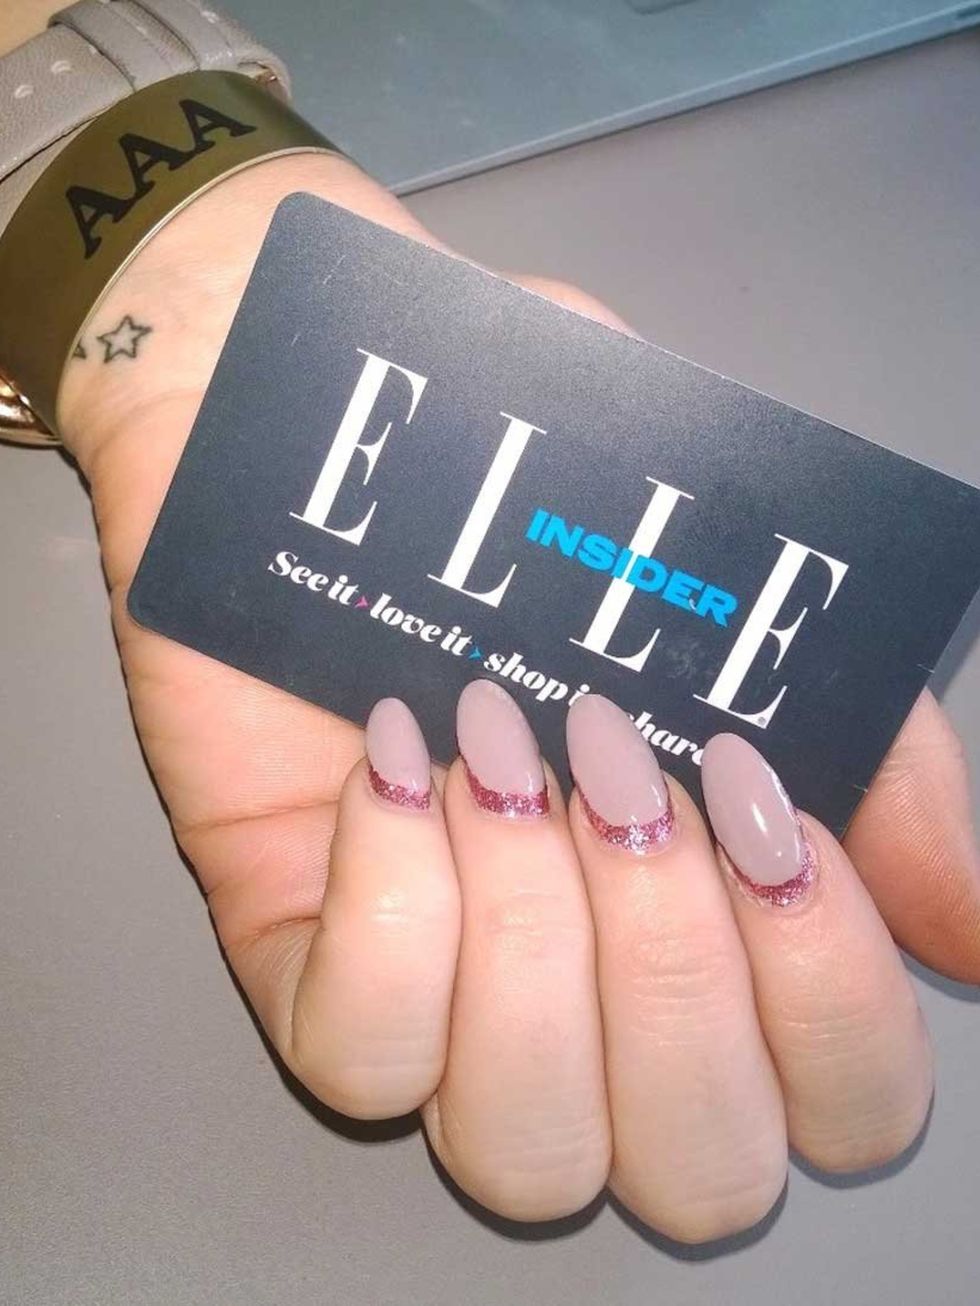 <p>Amy Lawrenson had a glitter/beige upside down french, by Nails Inc. Fancy trying it out? You can get 30% off all Nails Inc treatments if you're an <a href="http://www.elleuk.com/fashion/news/become-and-elle-insider-membership-subscriber-club-discount-o